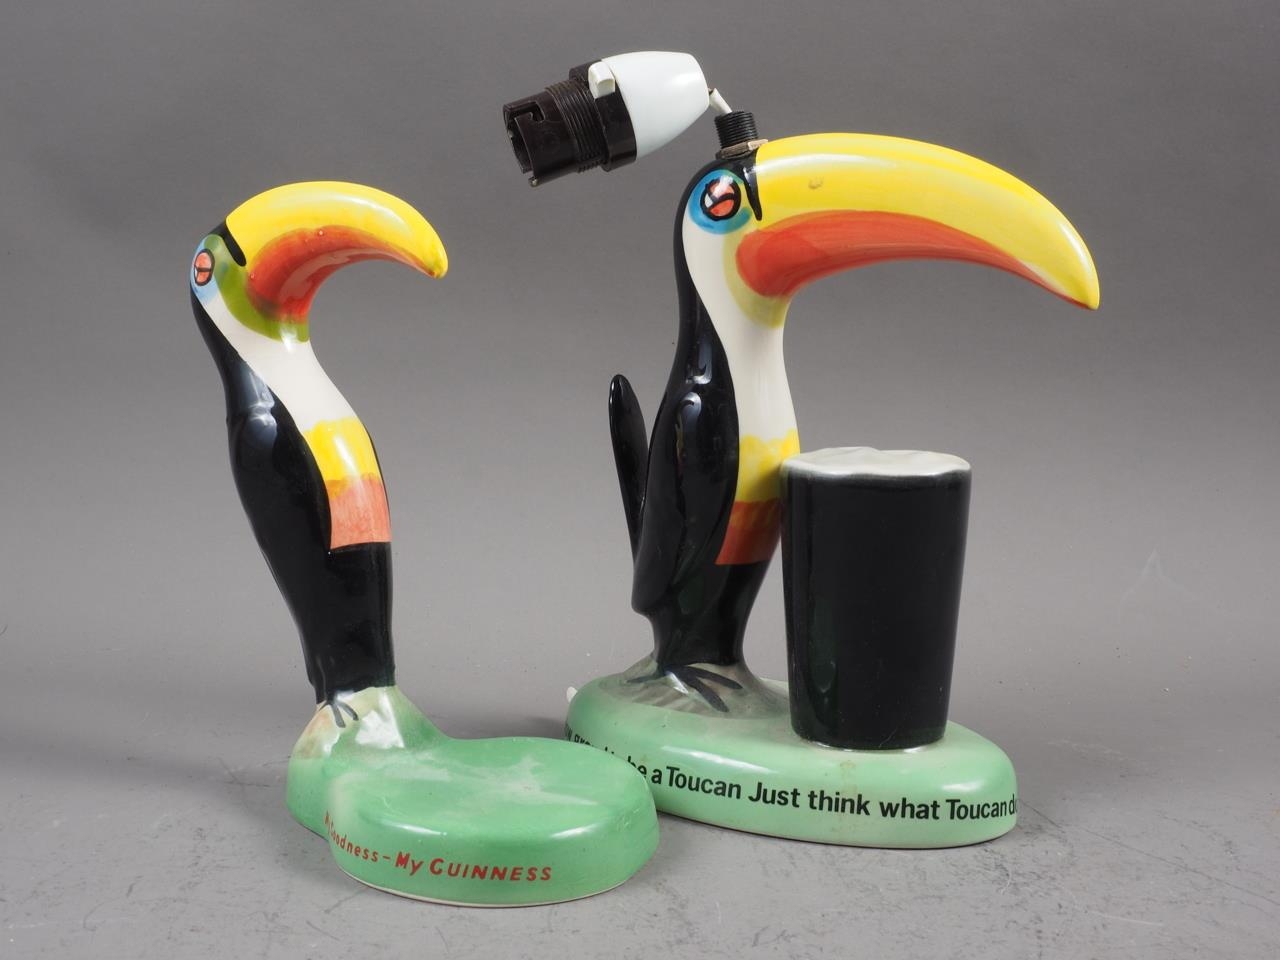 A Carltonware Guinness toucan and pint table lamp, 8 1/2" high, and a similar Carltonware Guinness